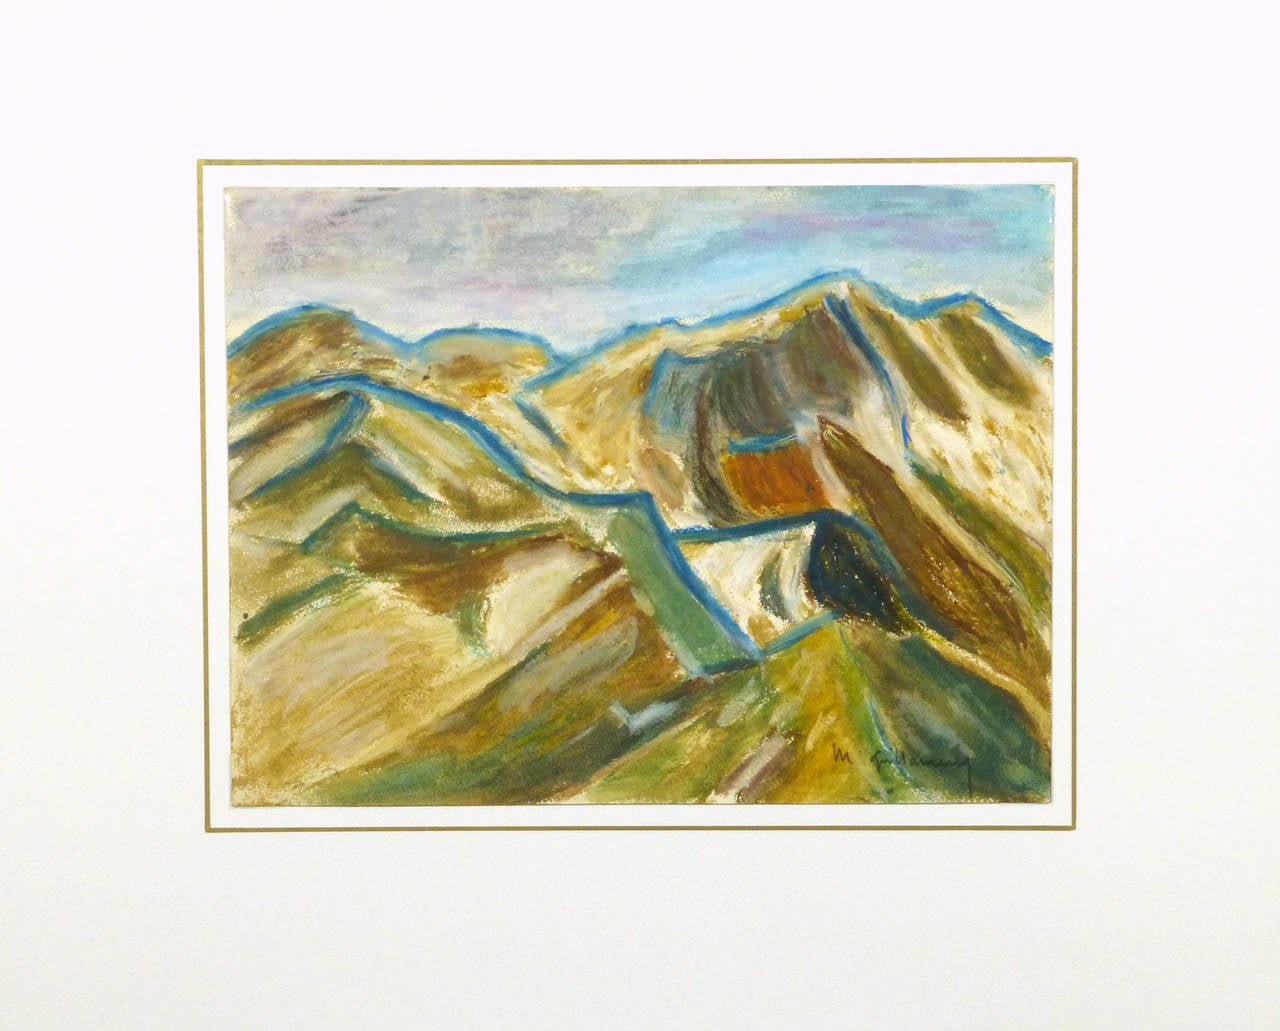 Distinct French oil pastel landscape of an overhead view of mountain peaks by artist M. Guillaumey, circa 1960. Signed lower right.

Original one-of-a-kind vintage work of art on paper displayed on a white mat with a gold border and fits a